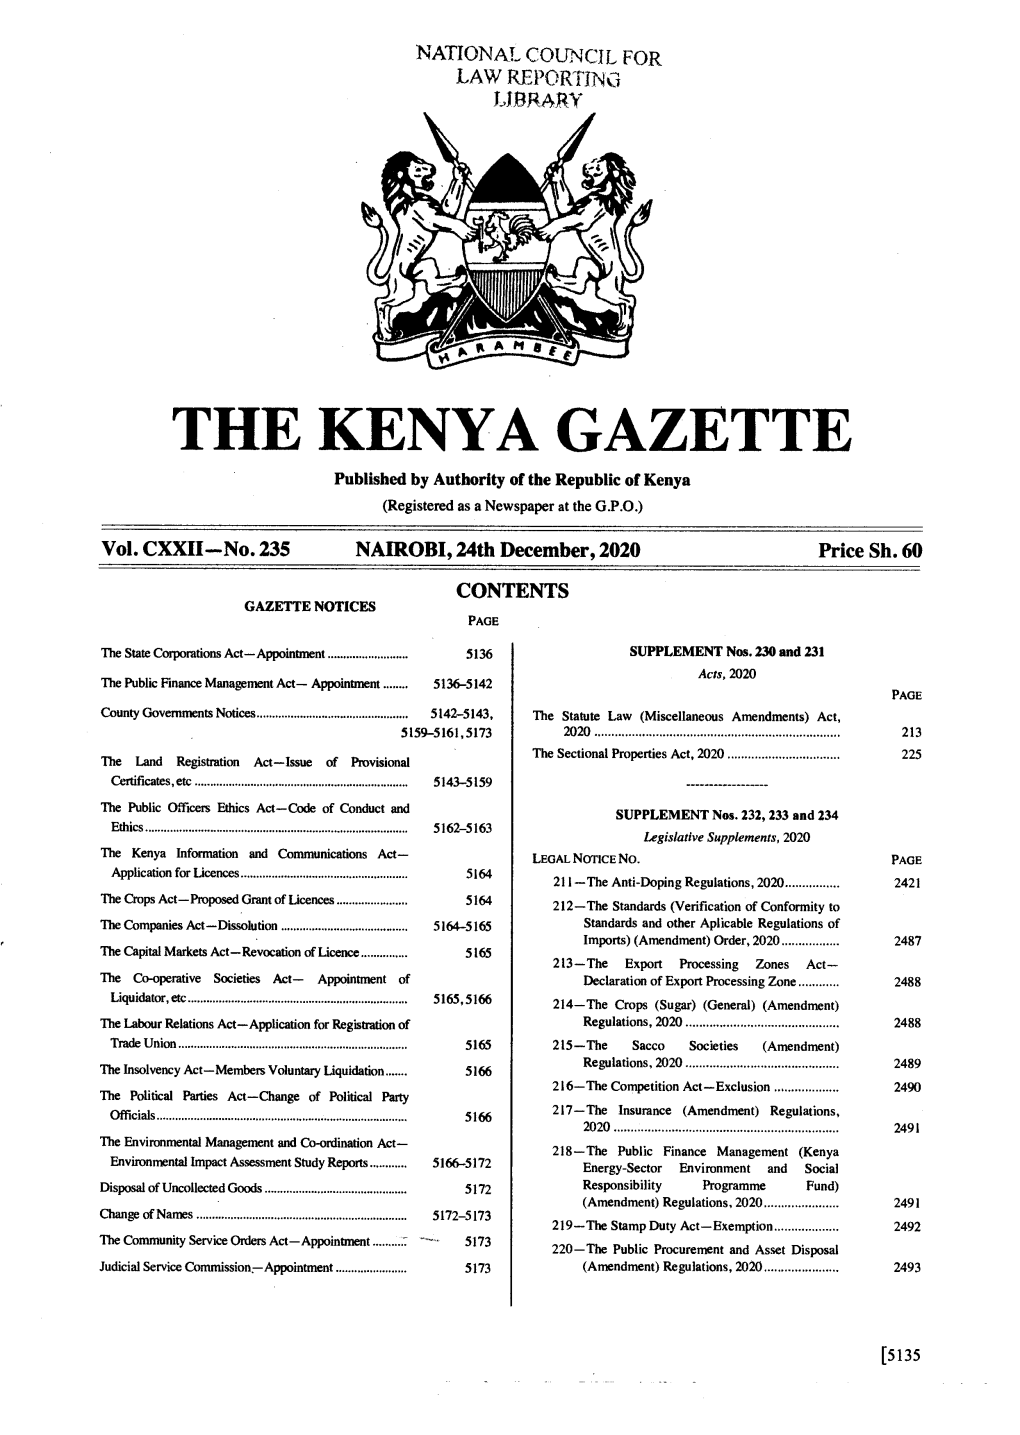 THE KENYA GAZETTE Published by Authority of the Republic of Kenya (Registered As a Newspaper at the G.P.O.) � Vol